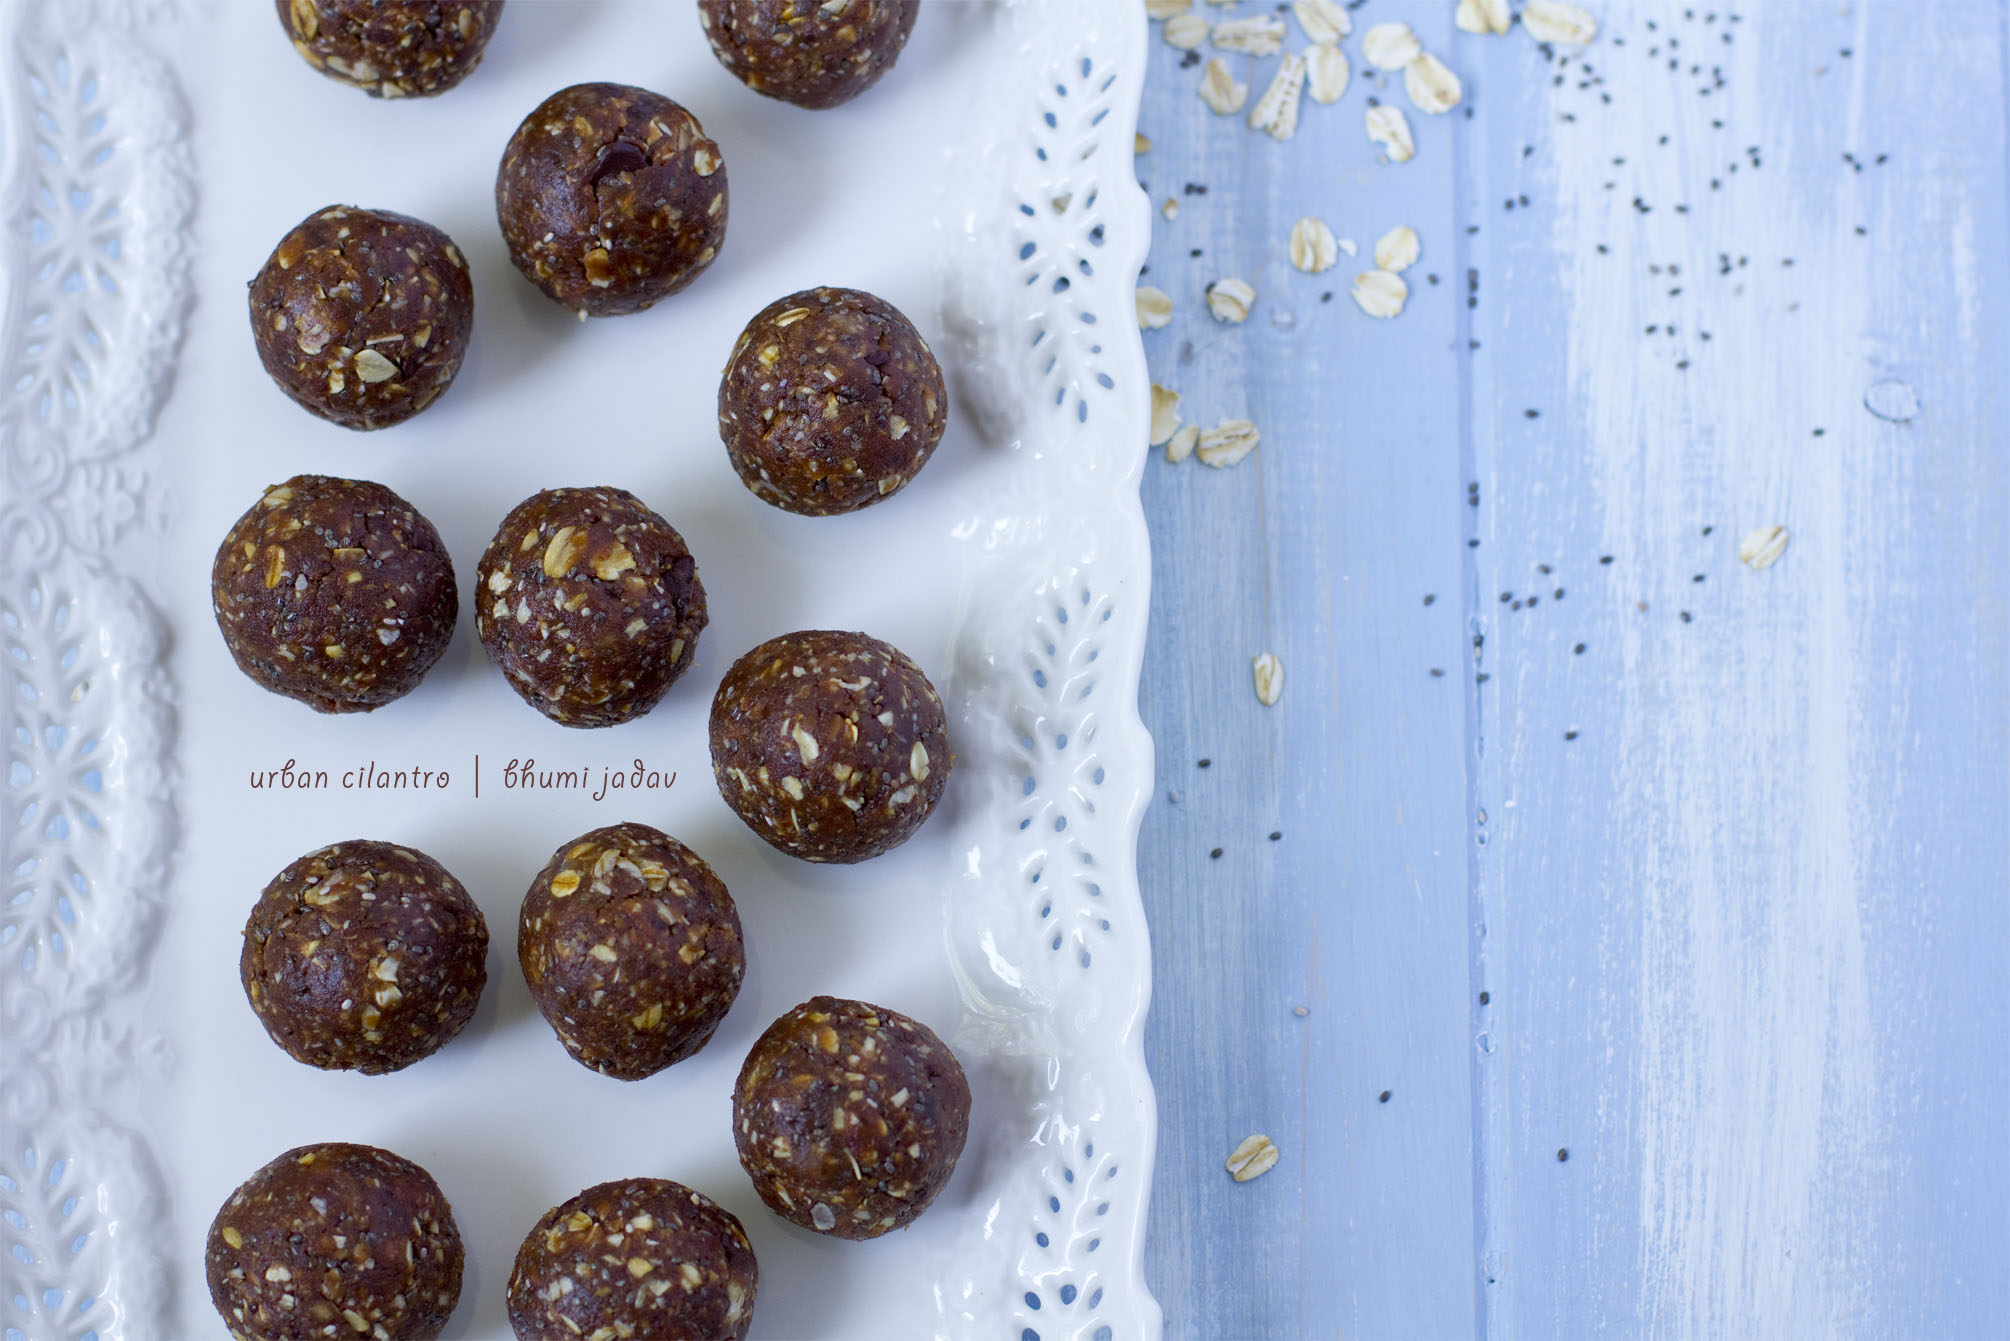 protein-packed, power balls, oats, dates, chia seeds, peanut butter, dark chocolate, energy balls, naturally sweetened, sugar-free, dairy-free, wholesome